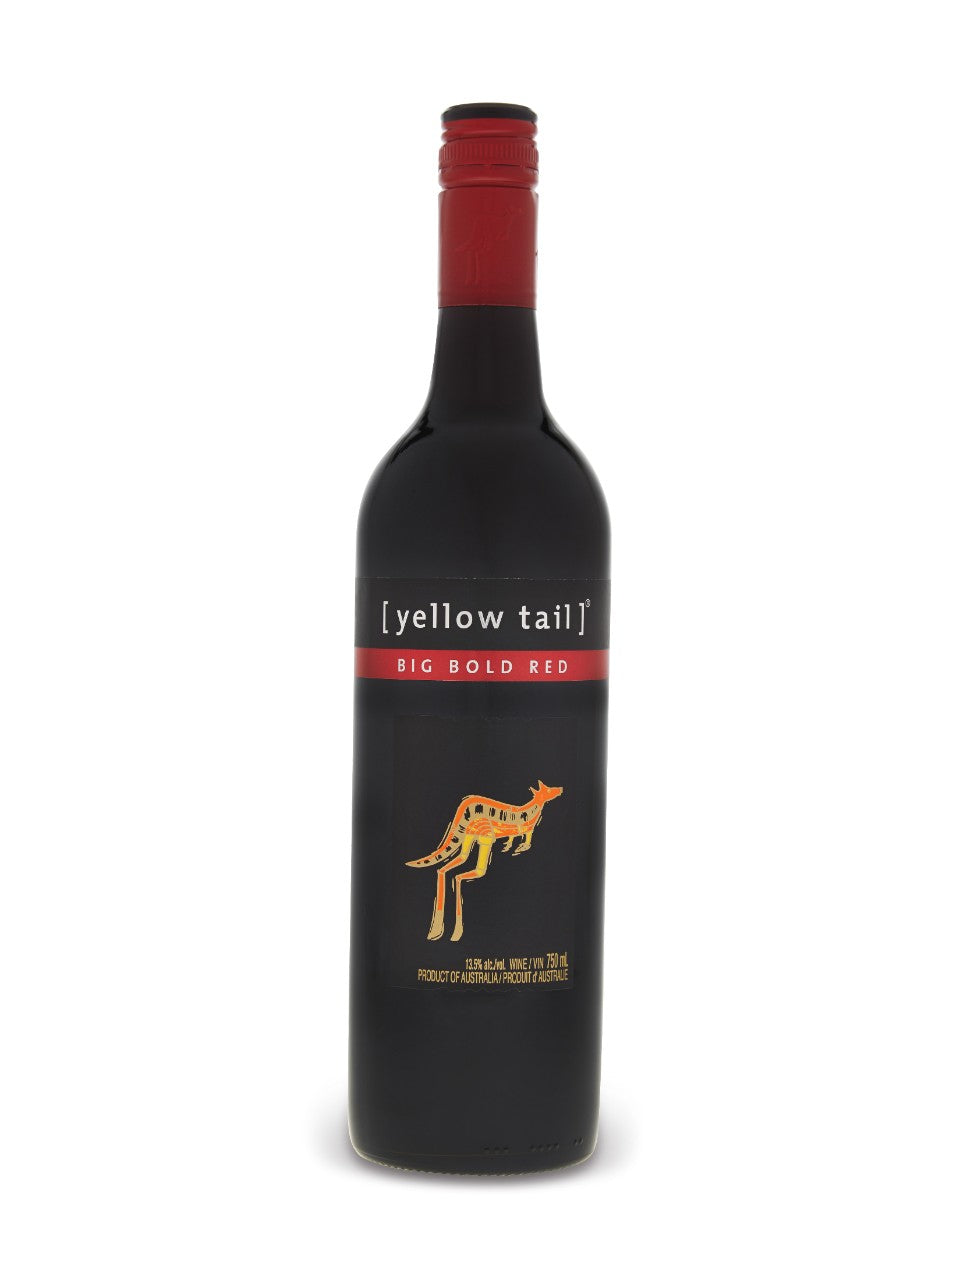 Yellow Tail Big Bold Red 750 ml bottle